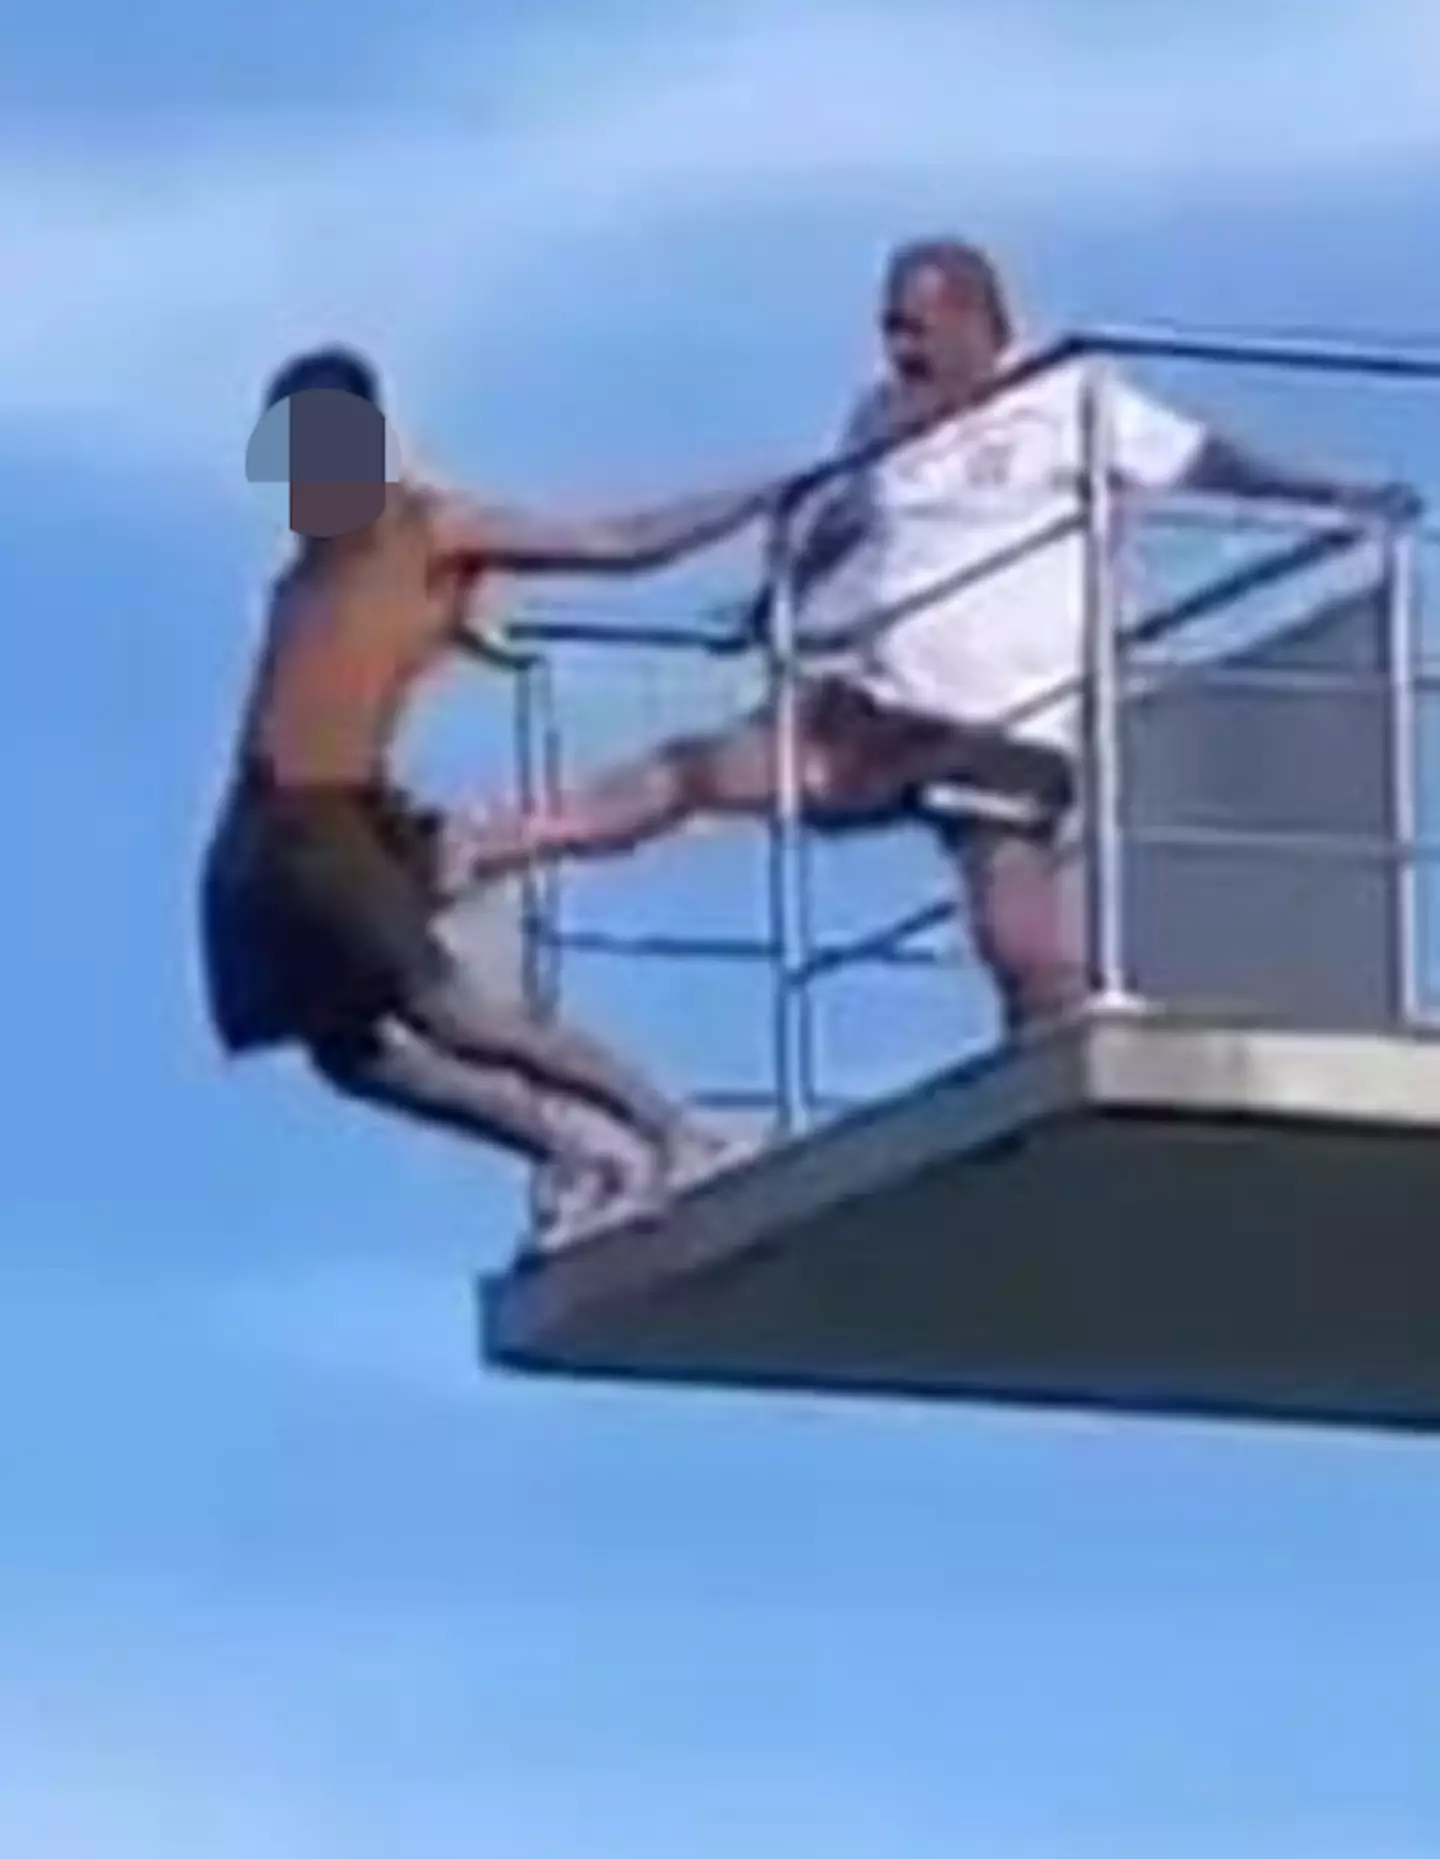 A video captured in Austria appears to show a young man hesitating at the top of a diving board before a lifeguard decides to kick him off.